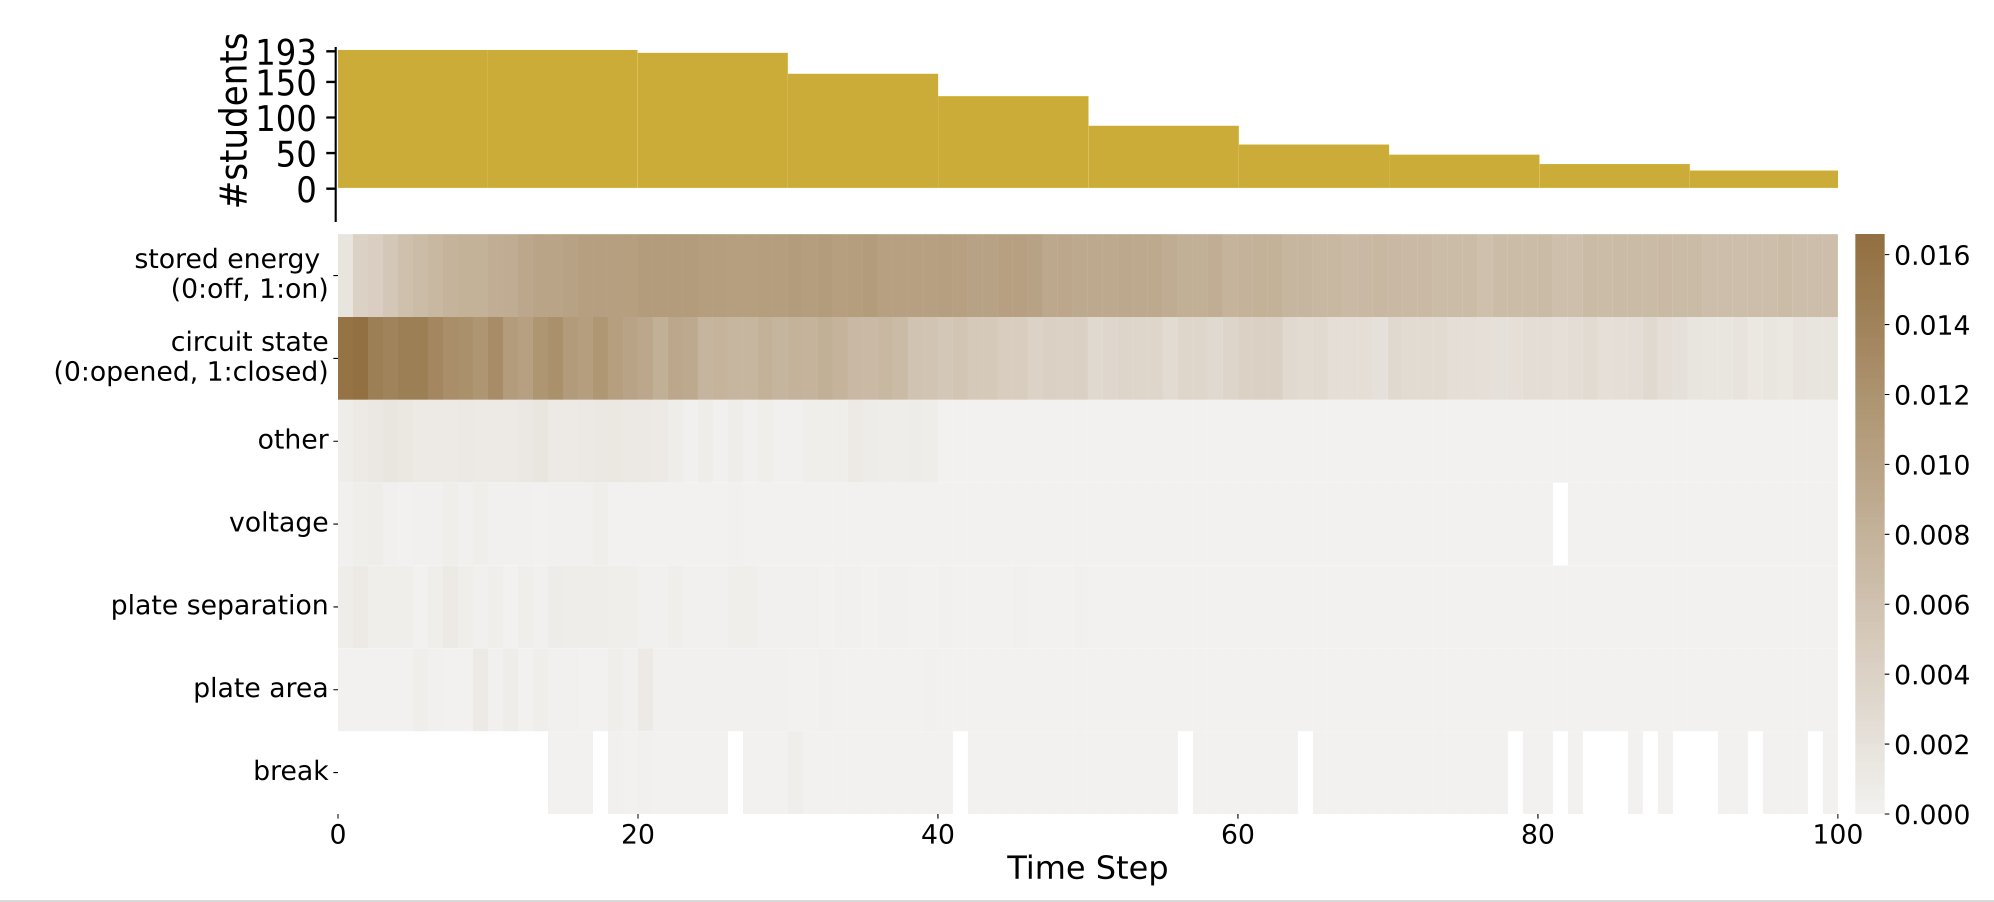 On top is a histogram showing the distribution of the students throughout different time steps. Most people (193) are kept until 20 time steps. At 60 time steps, less than 100 students are still present in the corpus. Most attention is given to the circuit state (0 if closed, 1 if opened): the scores are higher than 0.014 until around 20 time steps, and it is still higher than the other action features than the action features. The second highest attention score is for the stored energy. It goes above 0.008 from 15 time steps on.